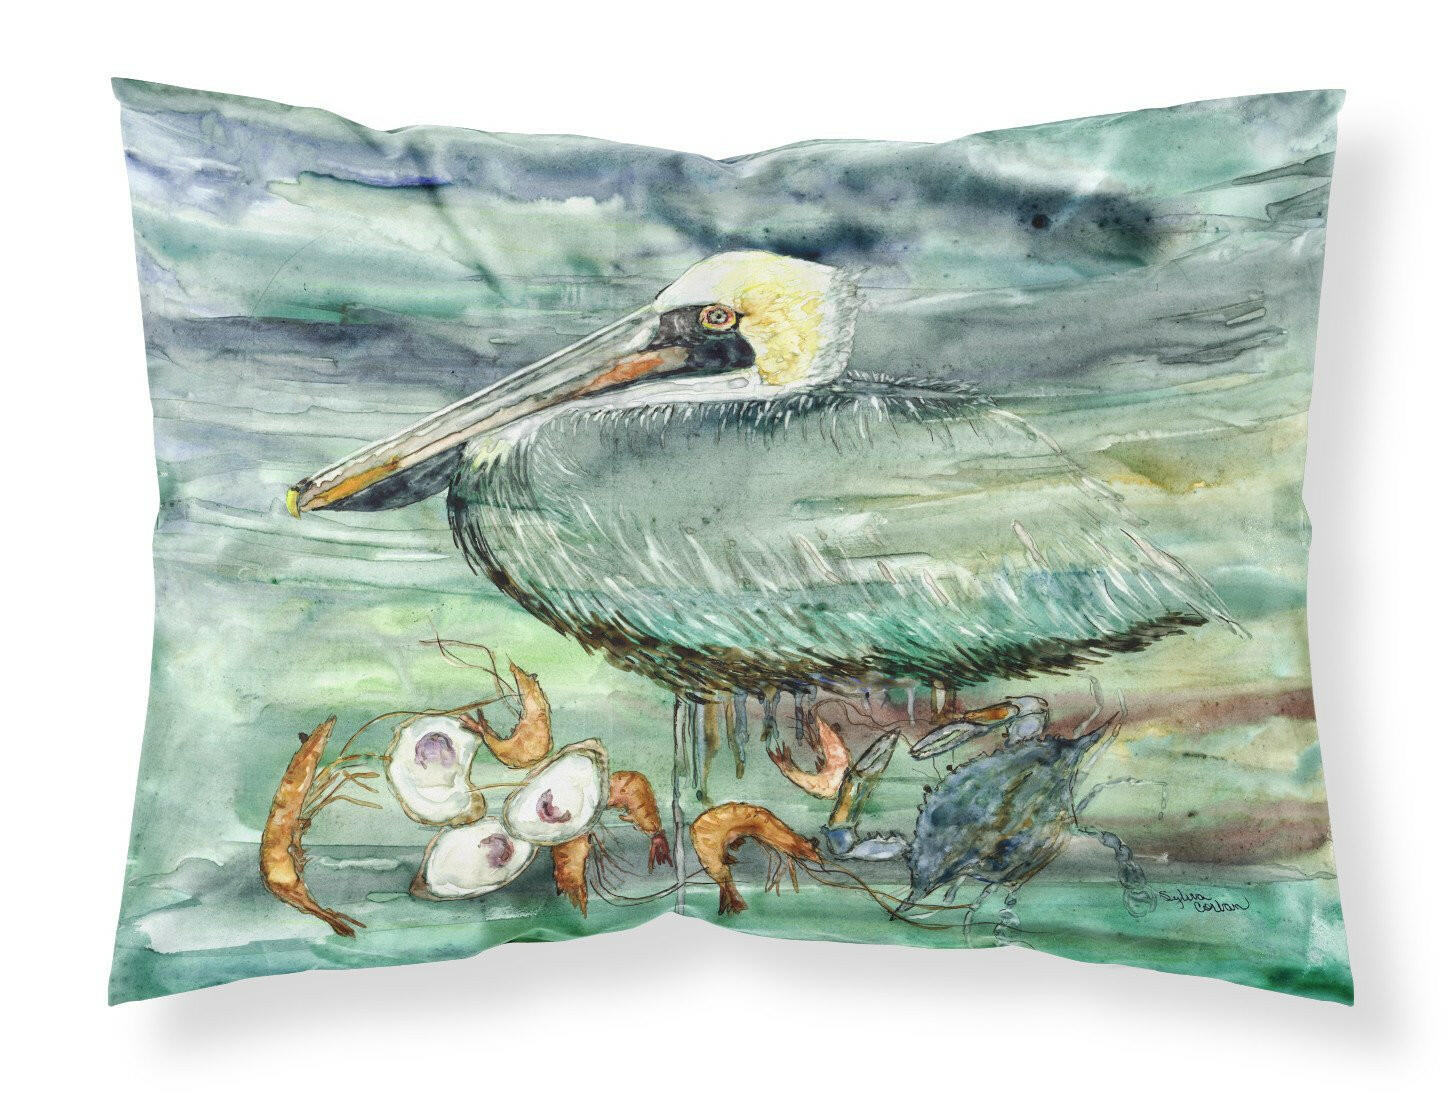 Watery Pelican, Shrimp, Crab and Oysters Fabric Standard Pillowcase 8978PILLOWCASE by Caroline's Treasures